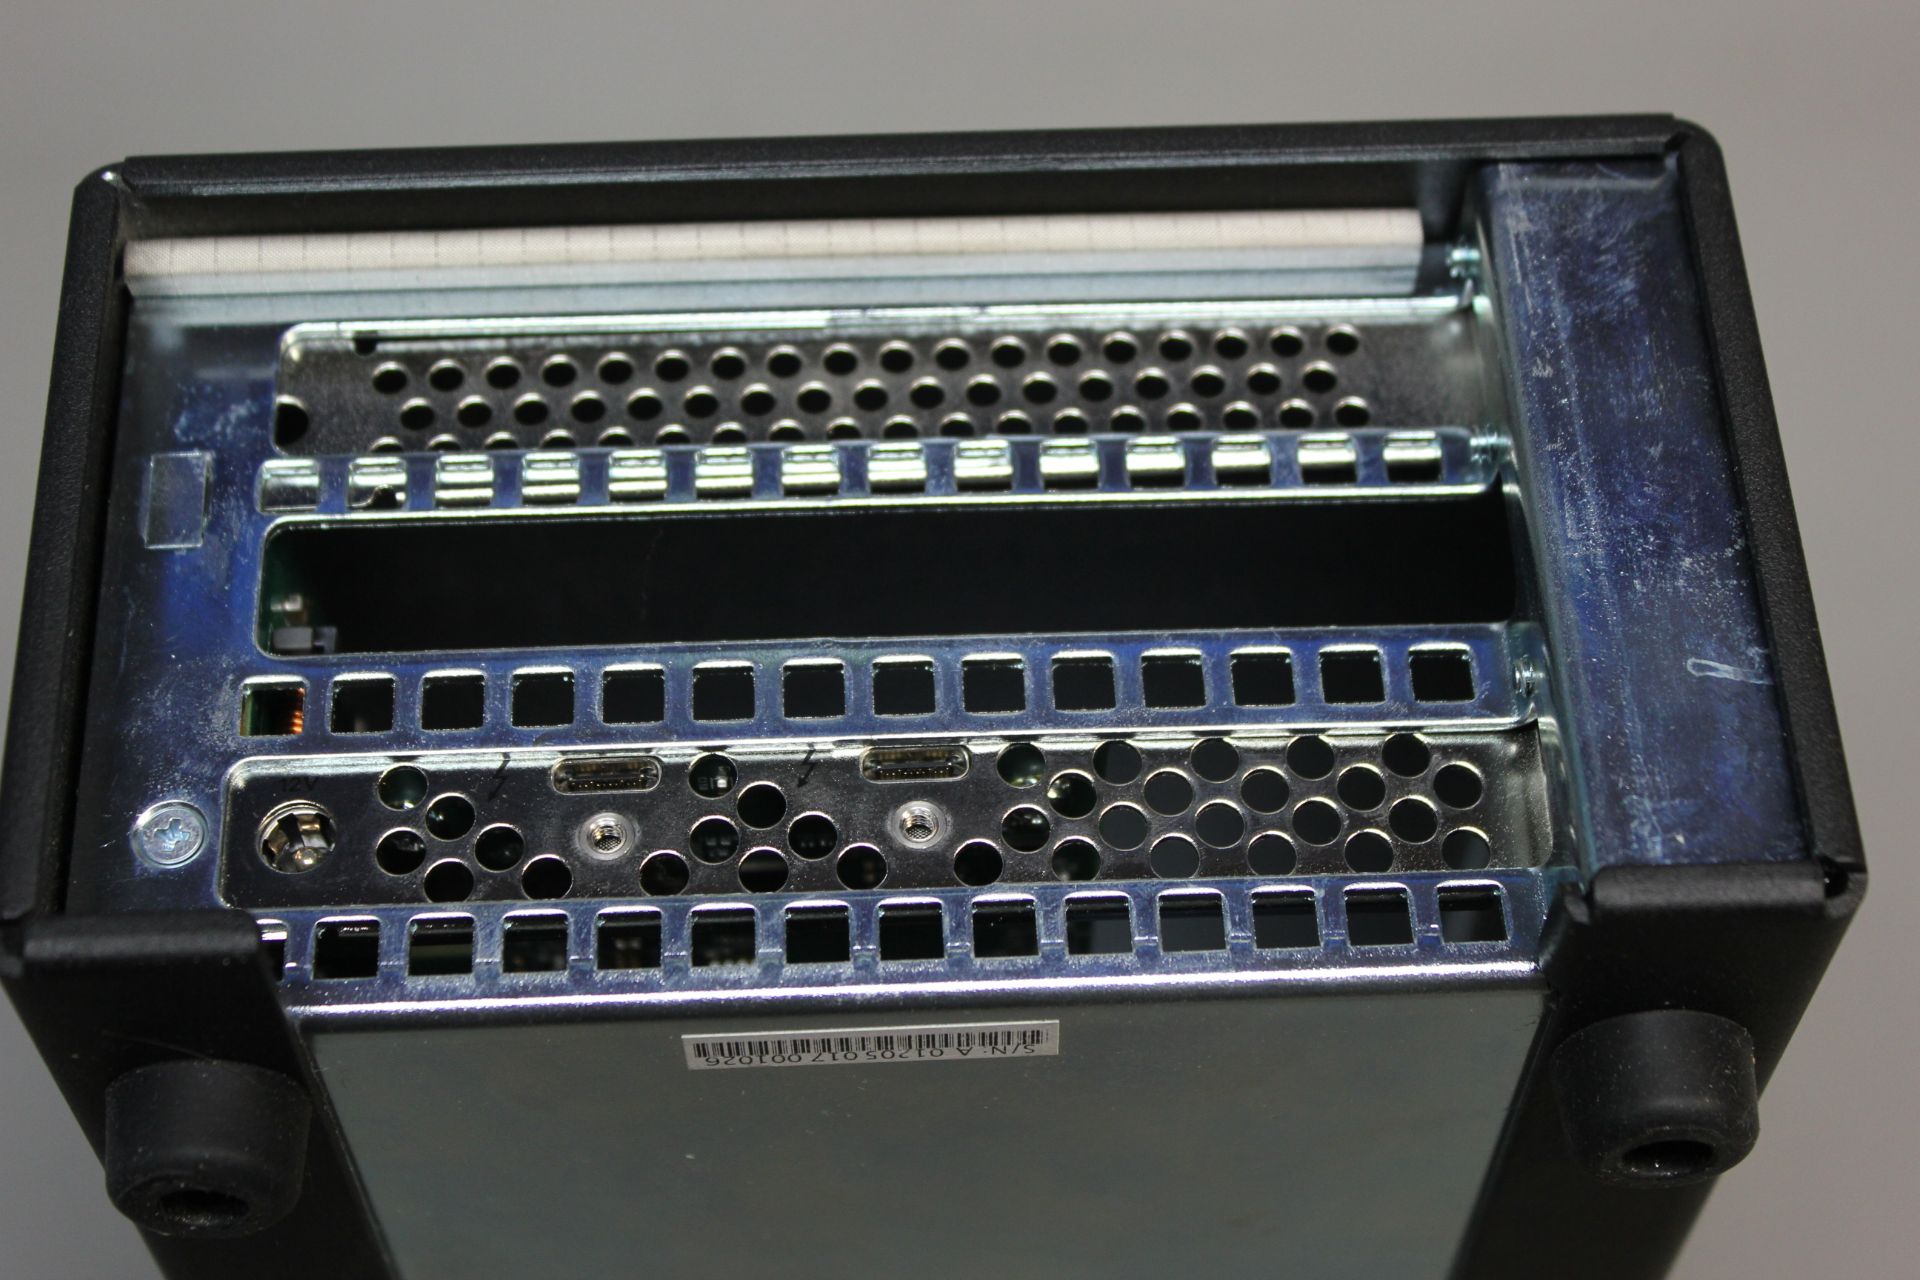 SONNET 1-SLOT THUNDERBOLT TO PCIE EXPANSION SYSTEM - Image 3 of 3